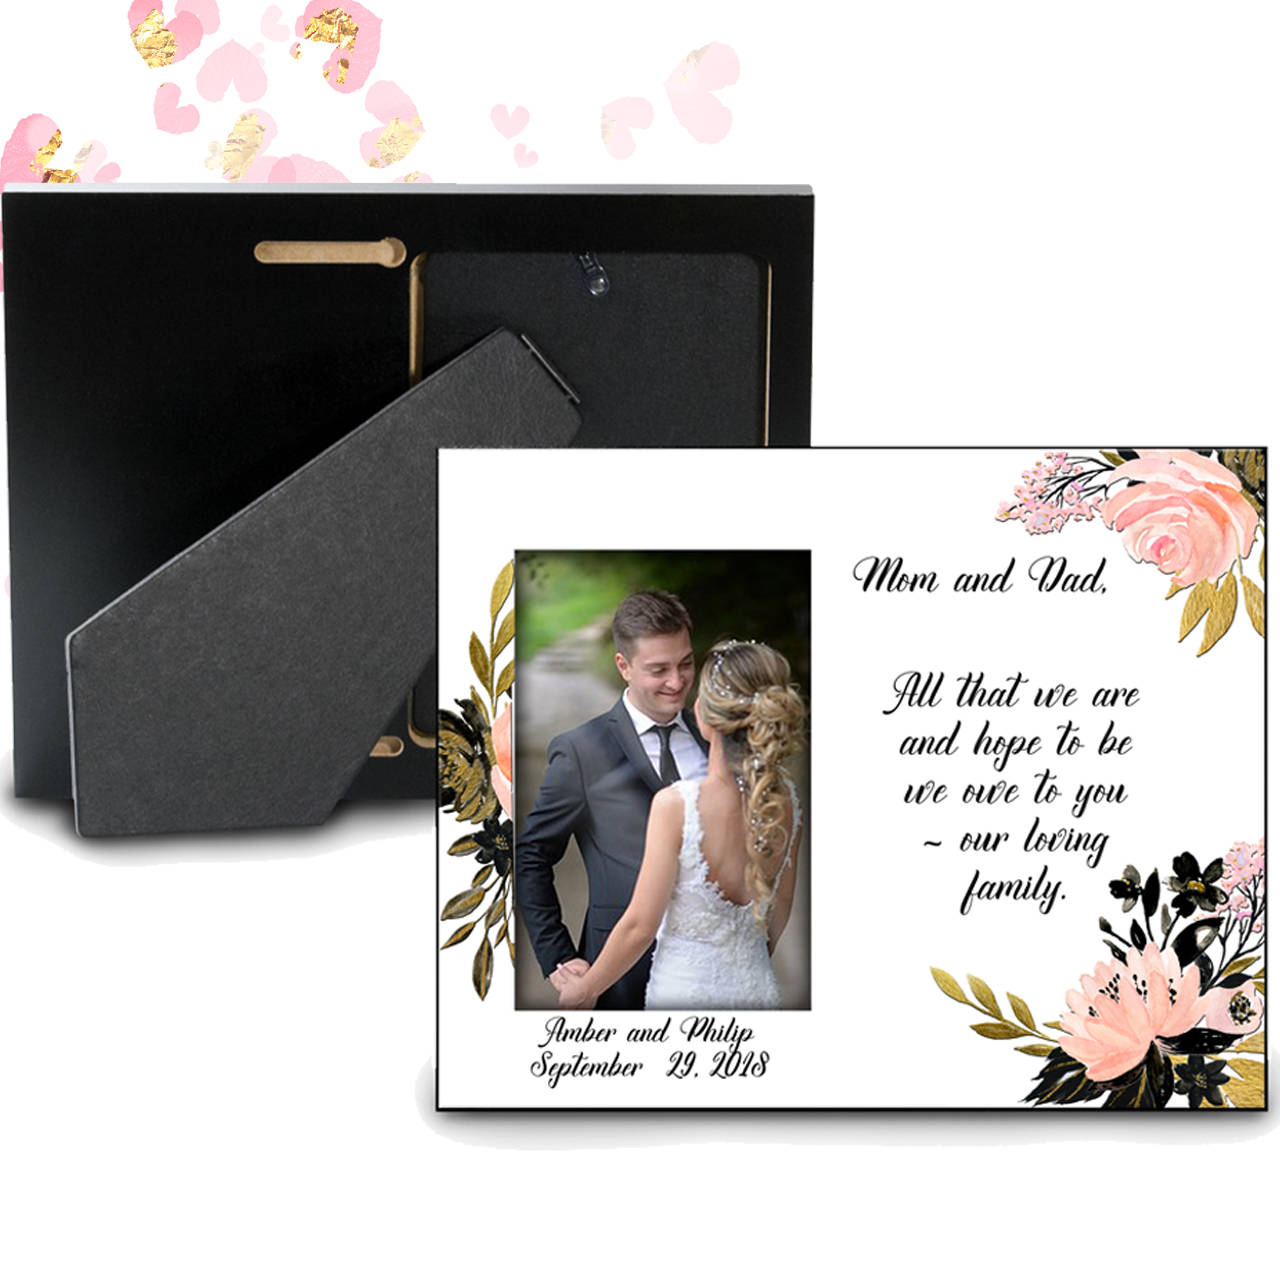 Mother of the Bride Gift / Mother of the Groom Gift / Personalized